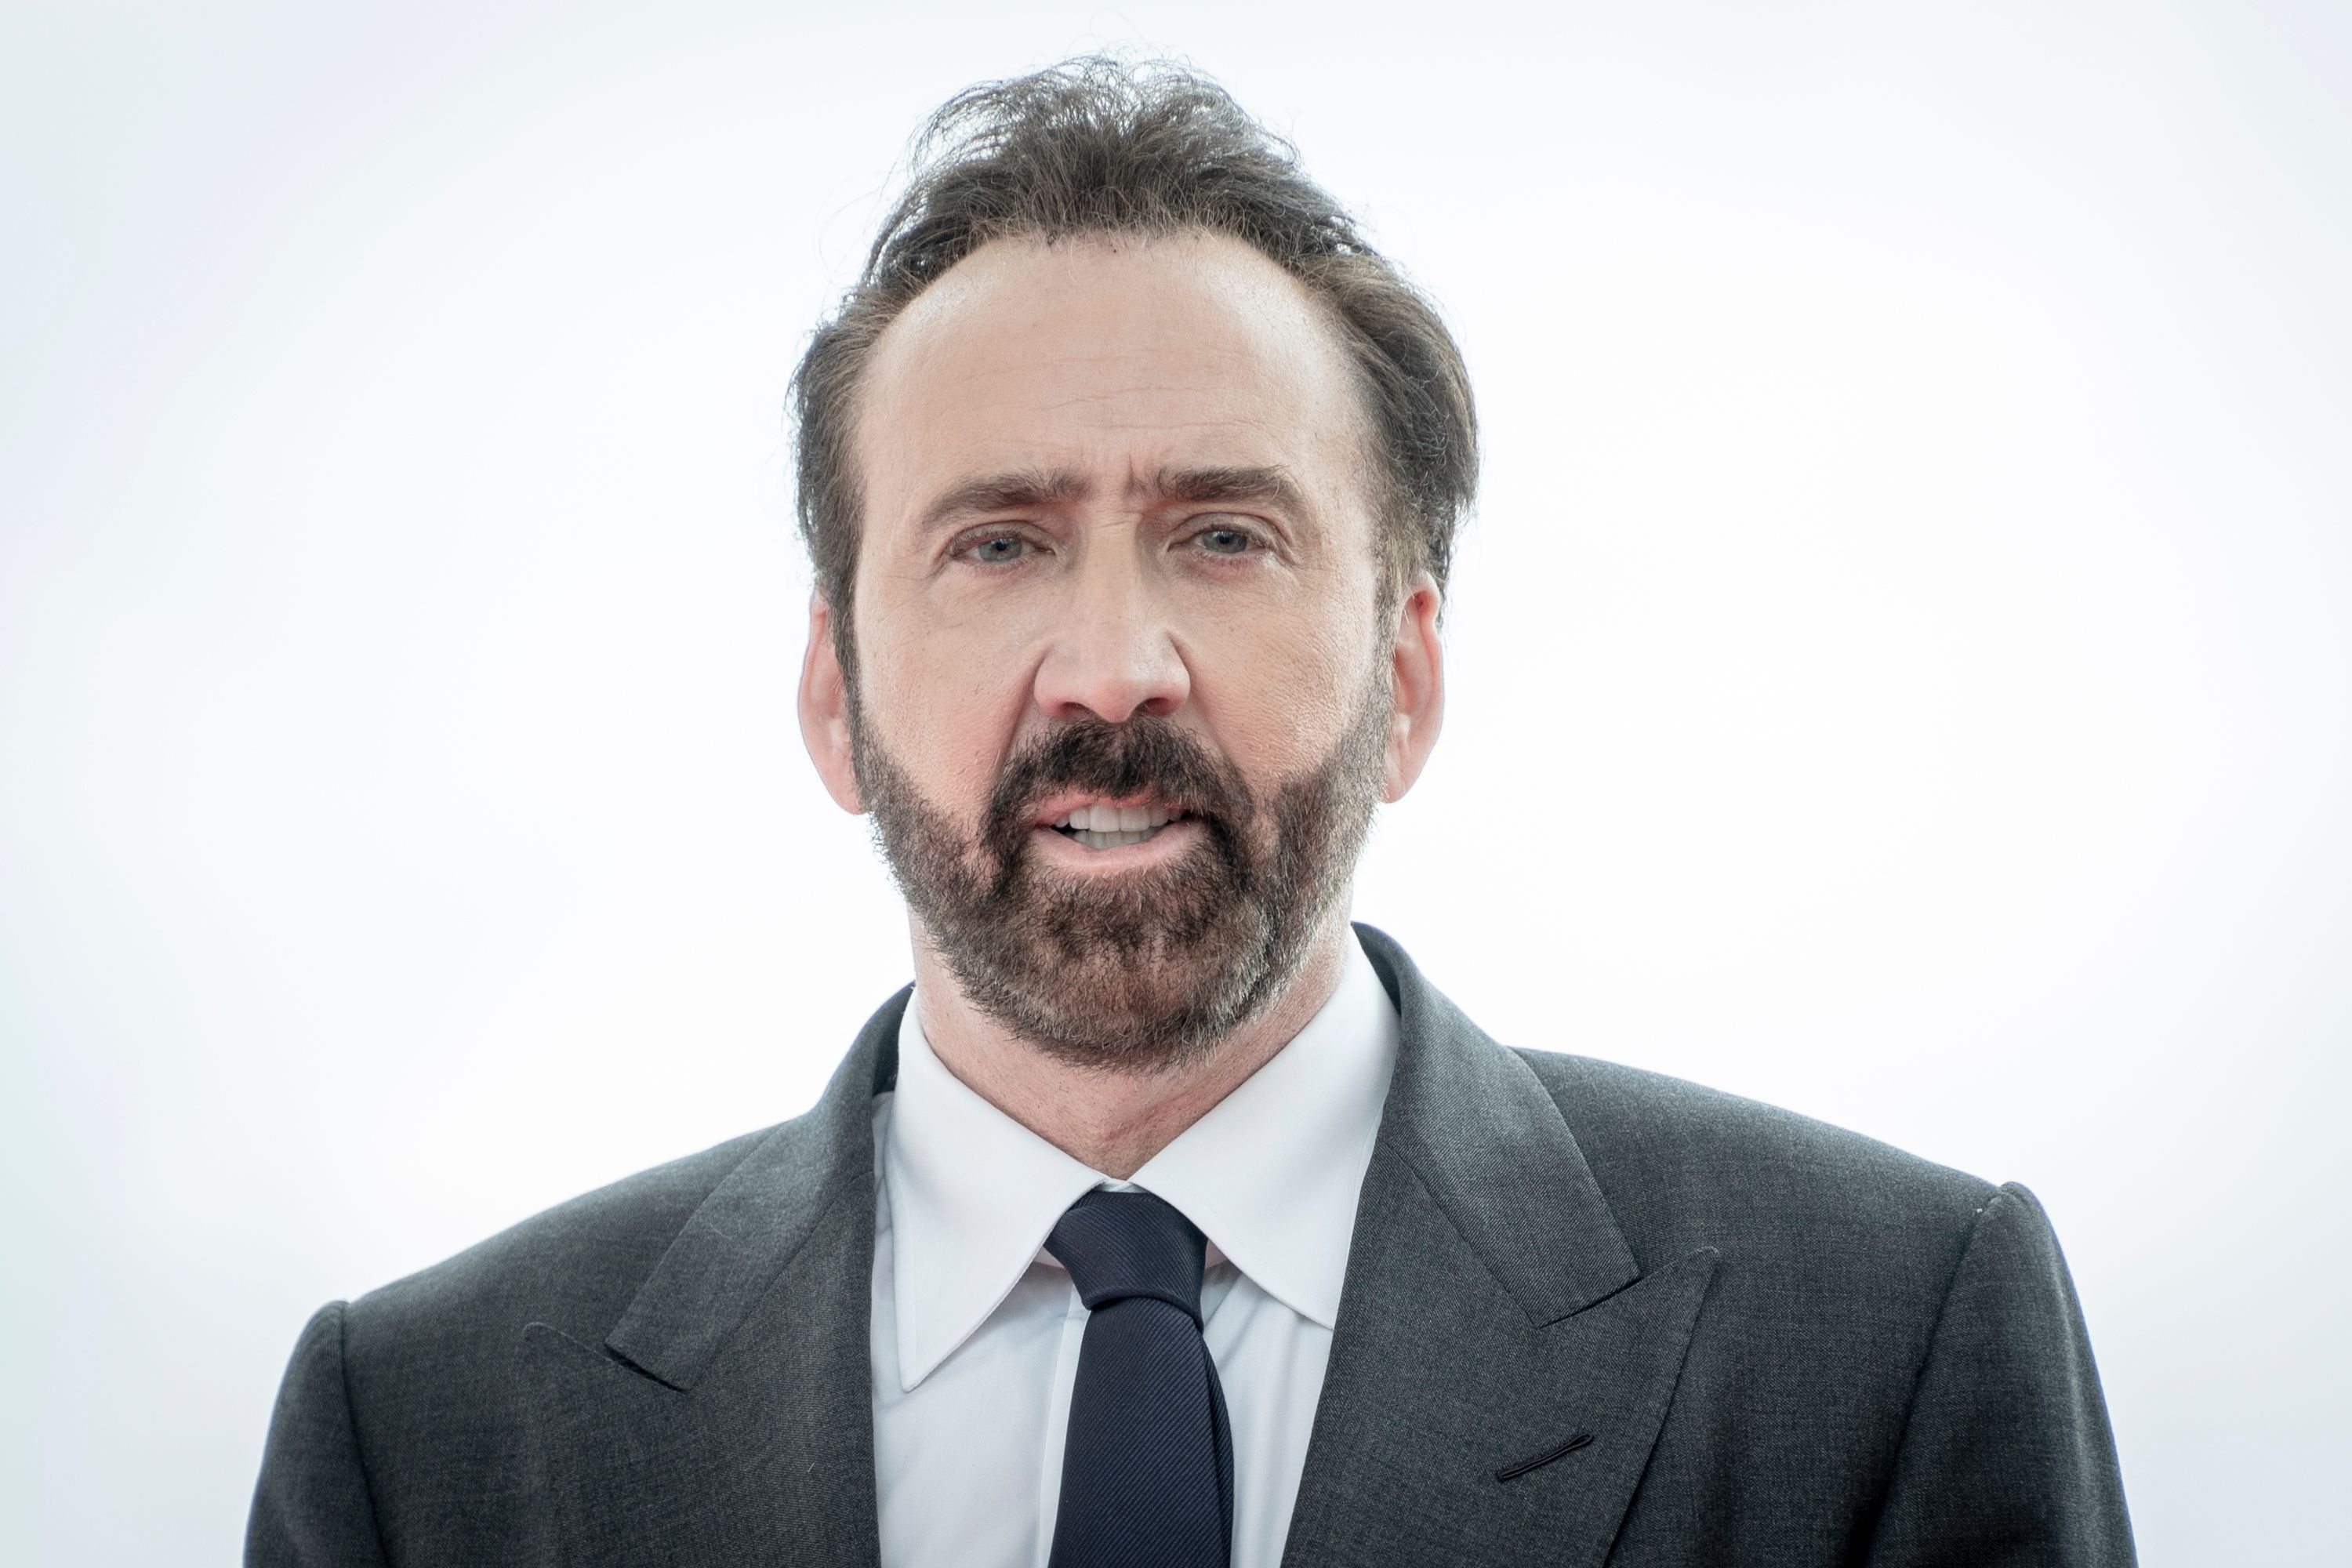 Nicolas Cage posing during a photocall on day three of the Sitges Film Festival 2018 in Sitges, Spain | Photo: Robert Marquardt/Getty Images